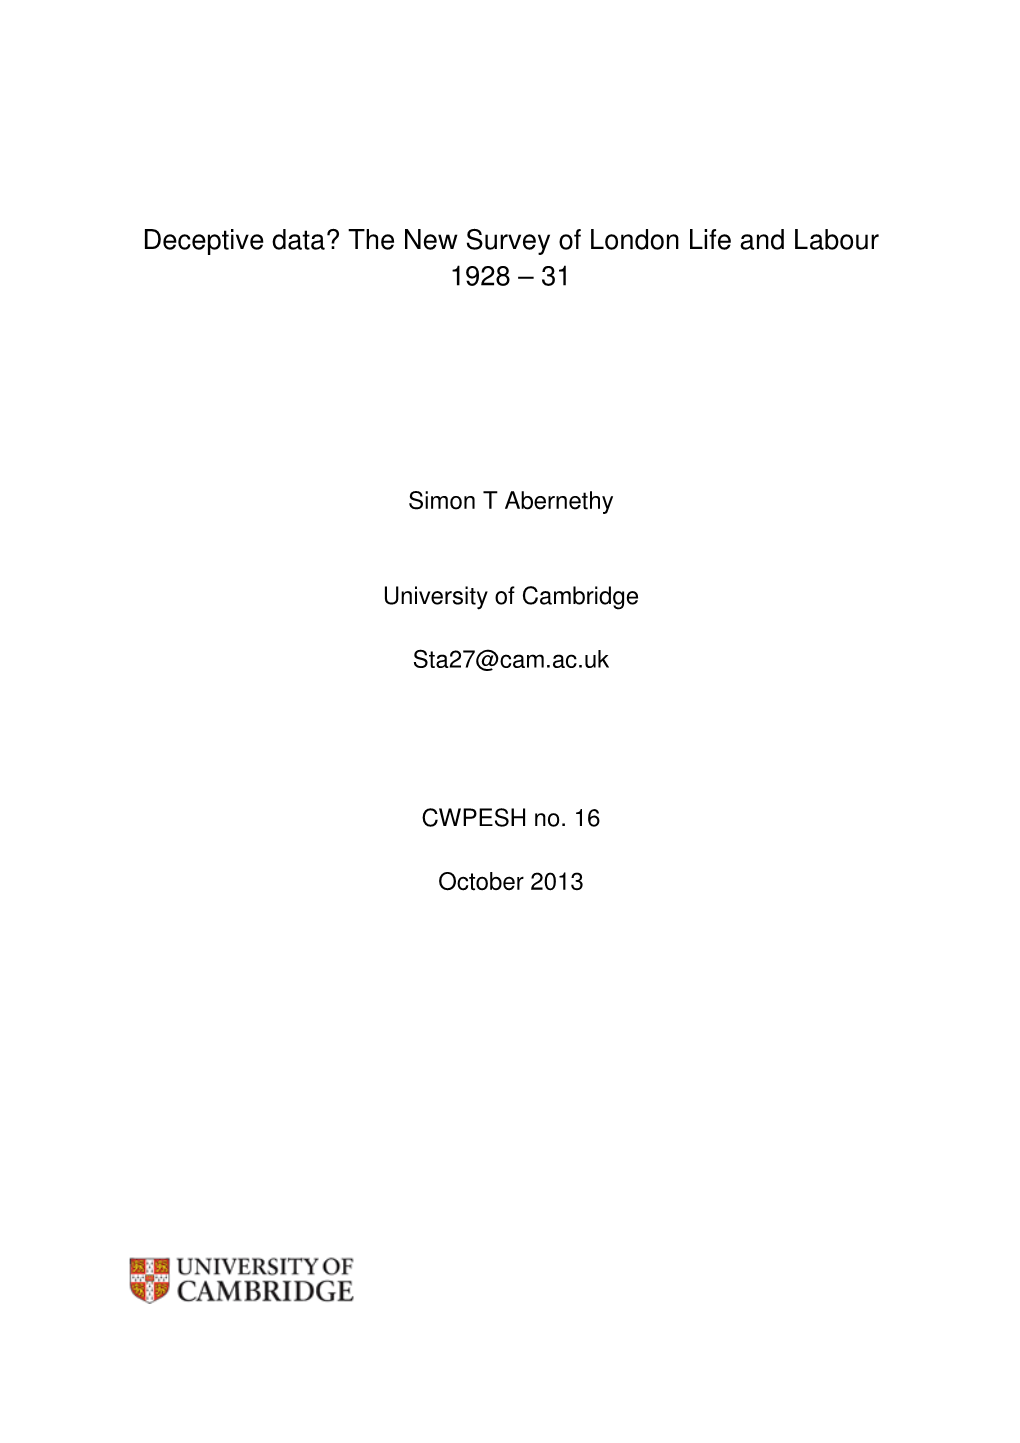 Deceptive Data? the New Survey of London Life and Labour 1928 – 31